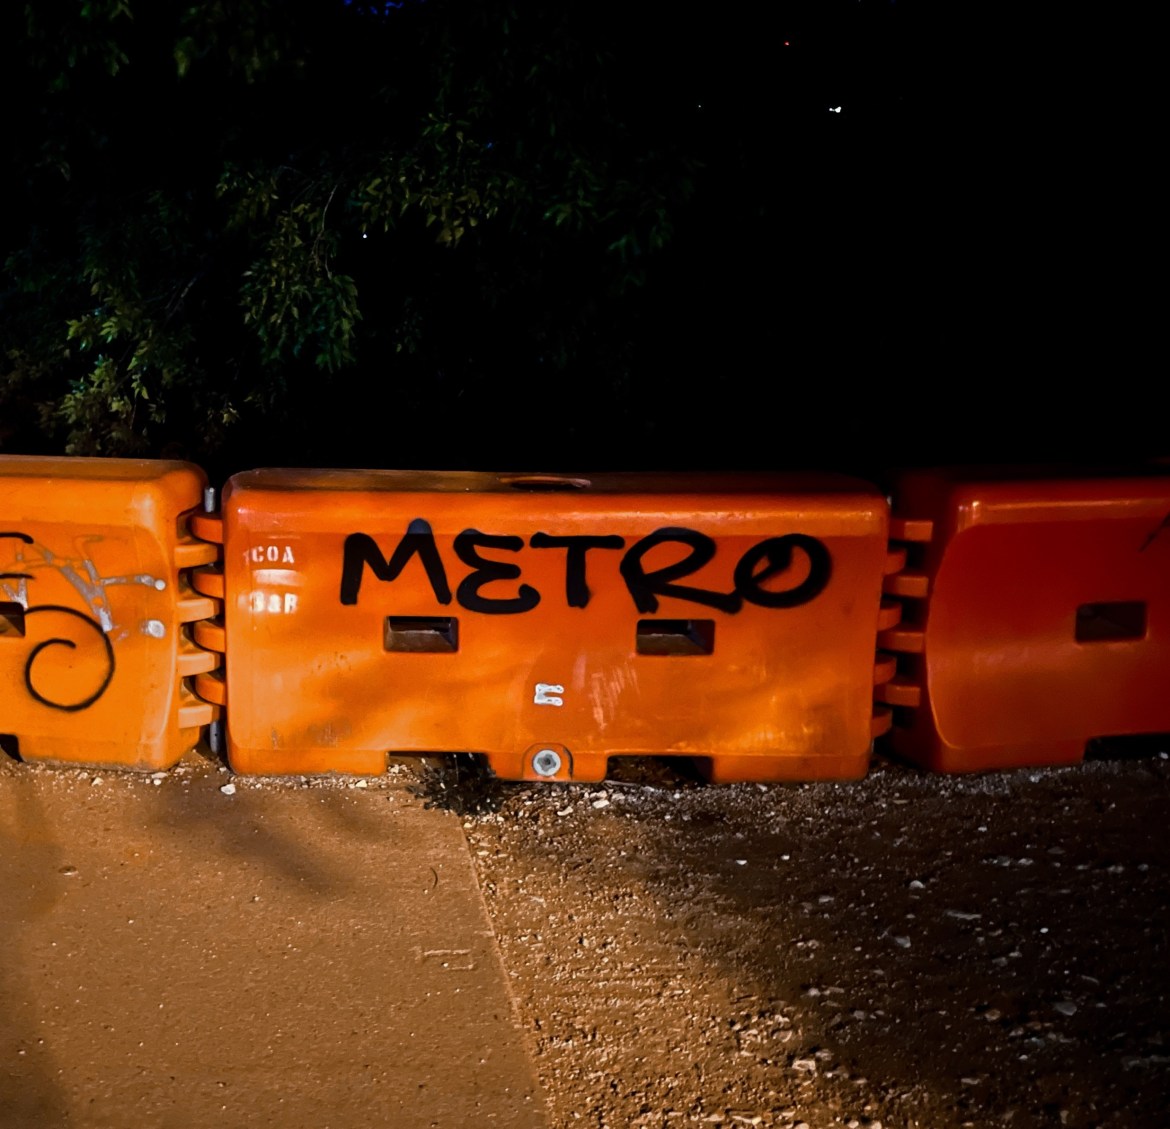 The word ‘Metro’ spray painting on an orange wall in a dark park. Referencing Metro’s name being “everywhere”